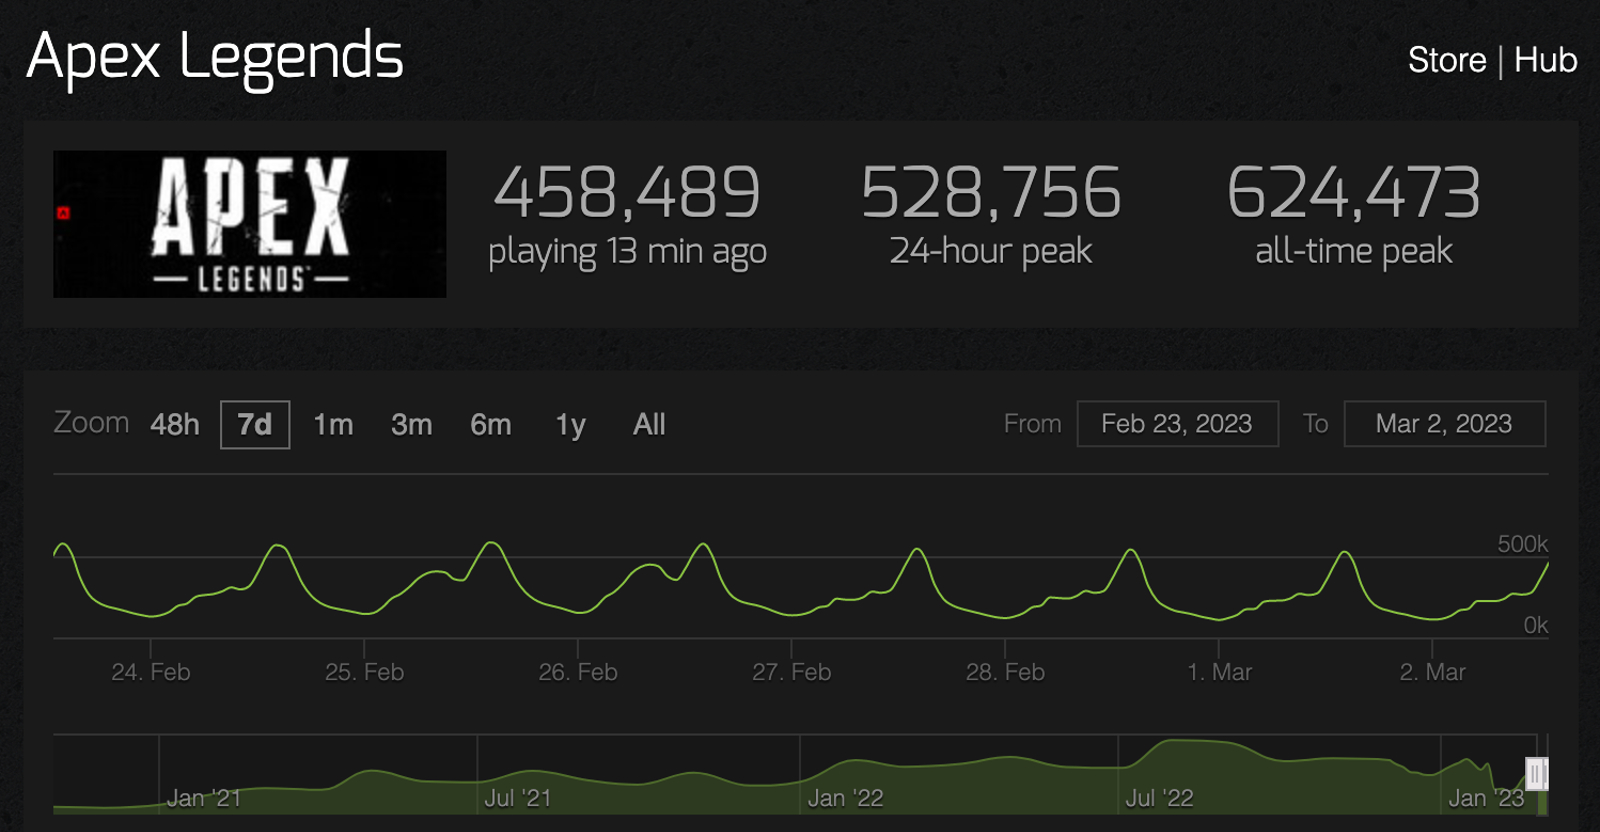 Fortnite Live Player Count and Statistics (2023)